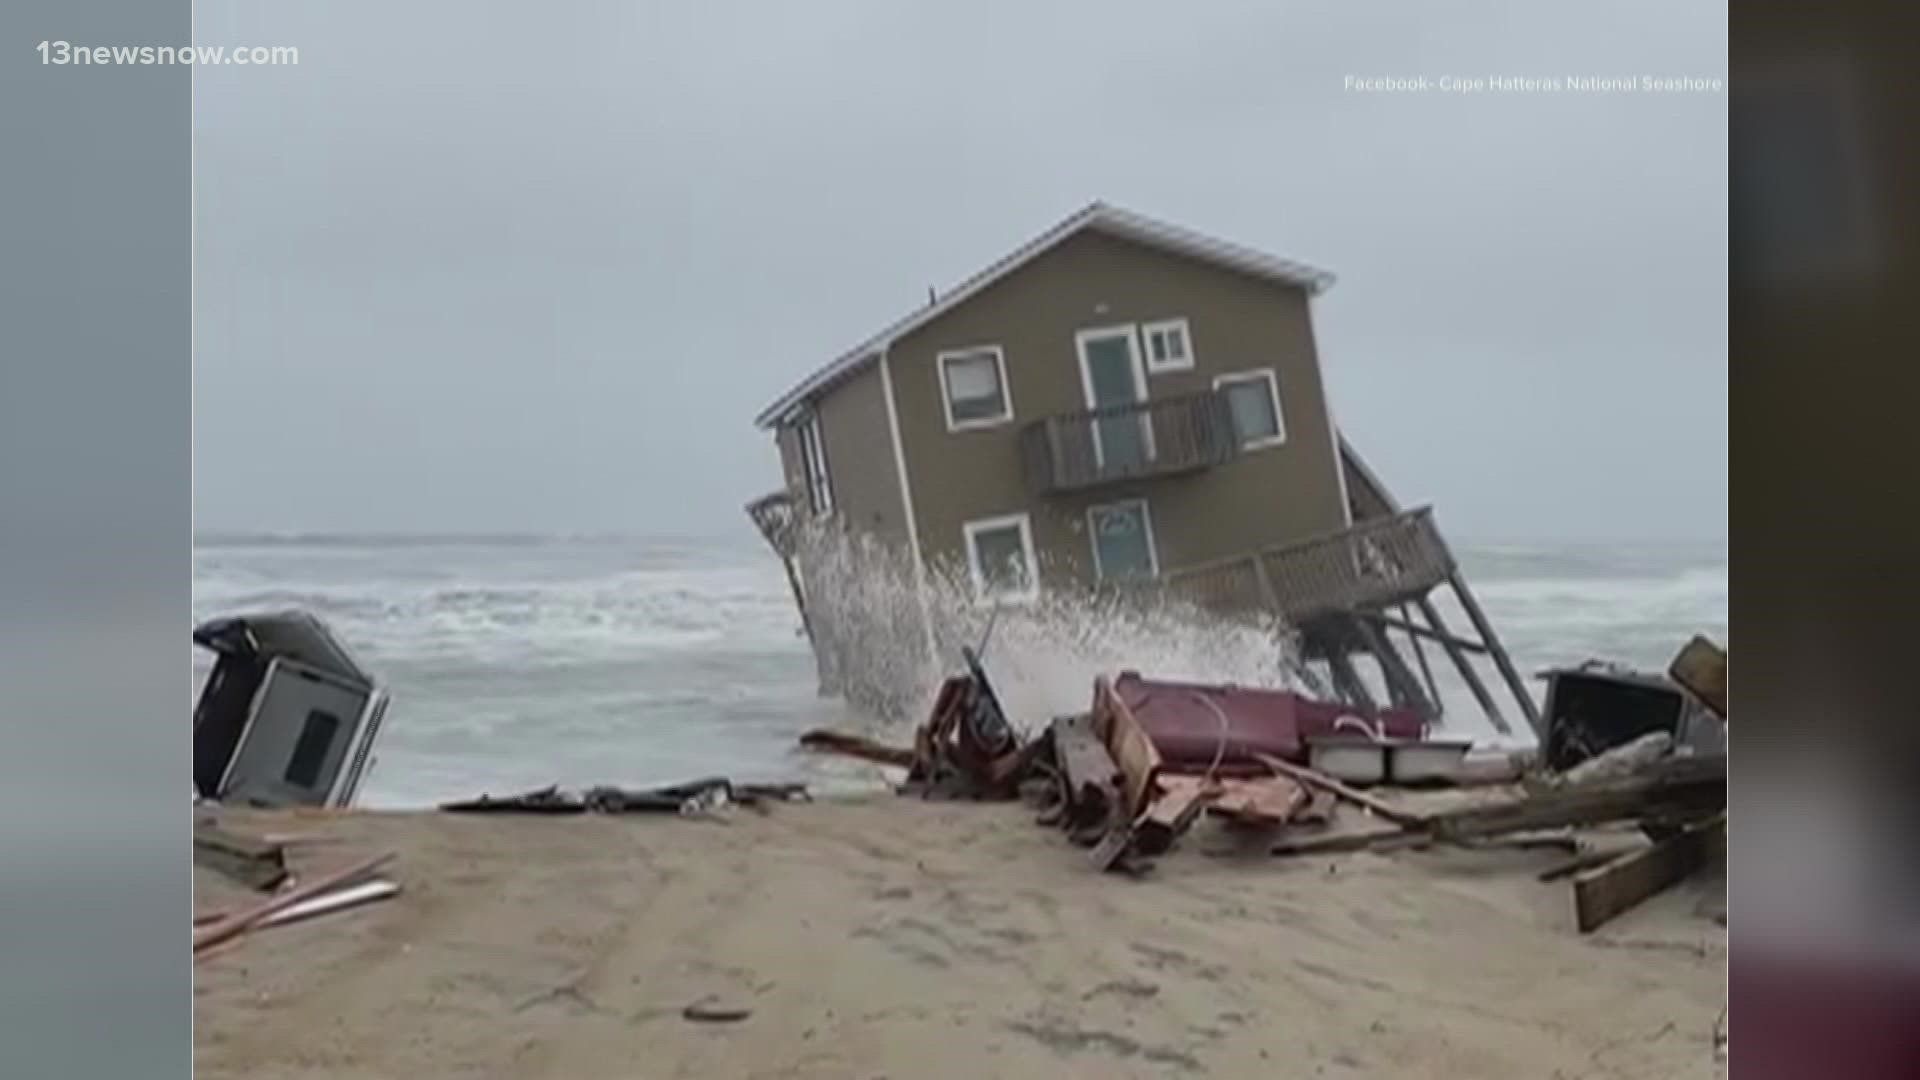 Three homes were washed out to sea in Rodanthe and more could be in danger. Now, there's a race to prolong the lifespan of homes and beaches threatened by erosion.